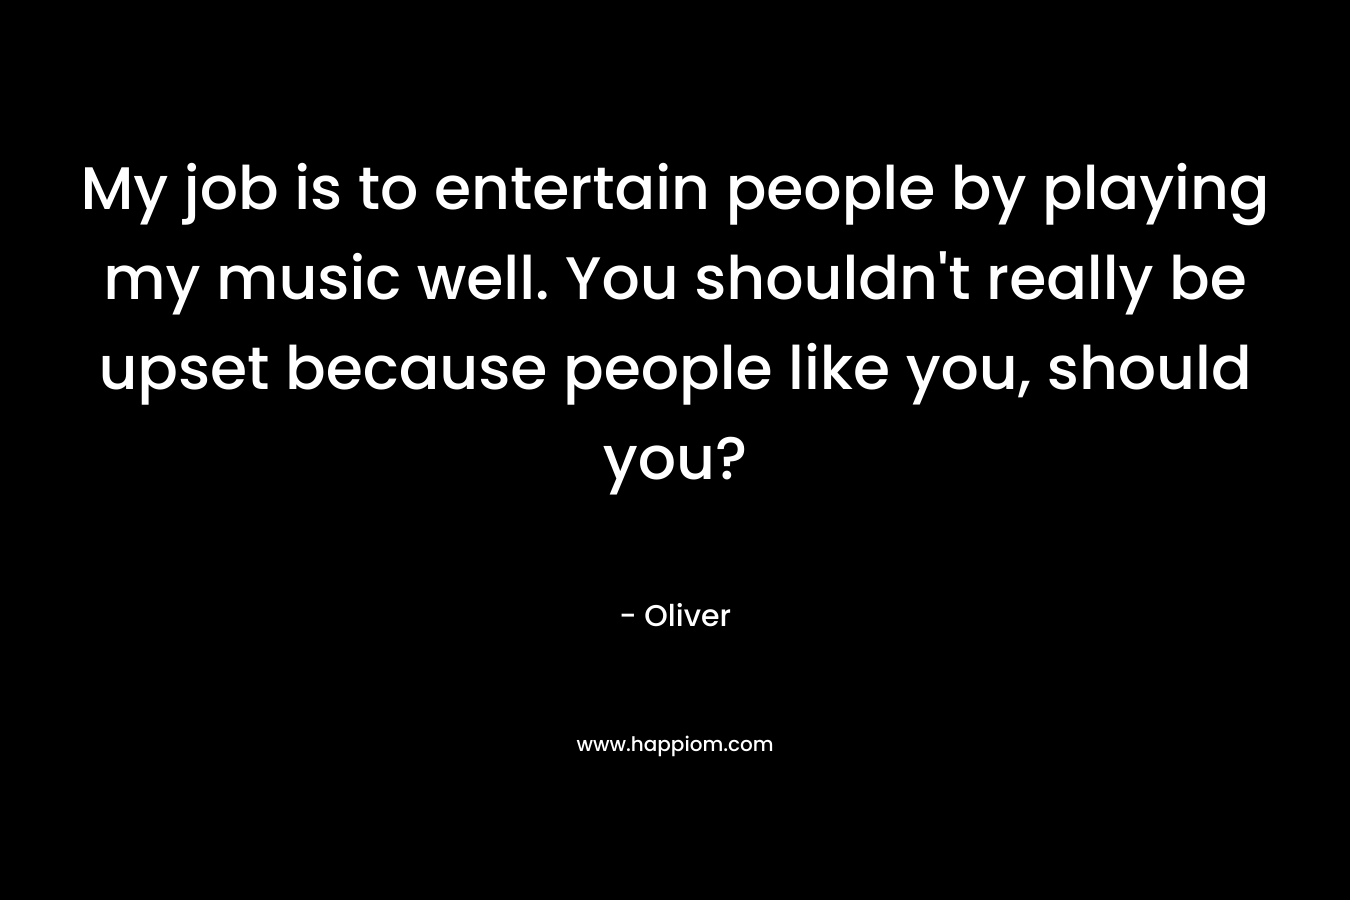 My job is to entertain people by playing my music well. You shouldn't really be upset because people like you, should you?